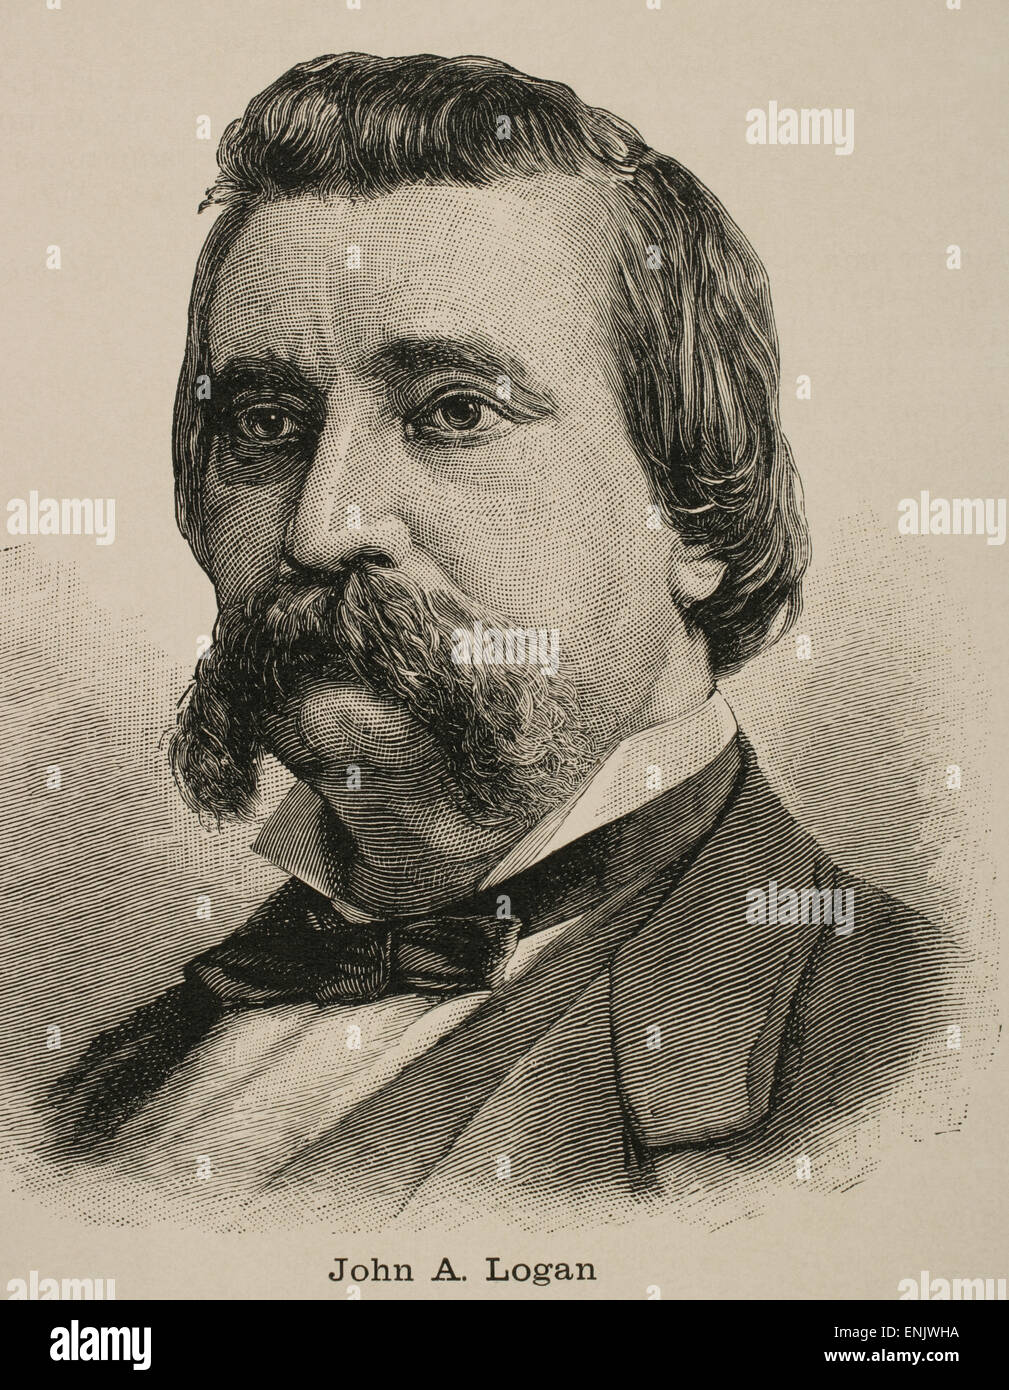 John A. Logan (1826-1886). Amerian soldier and political leader. Served in Mexican-American War and America Civil War (Union Army). United States Senator from Illinois. Engraving. Stock Photo